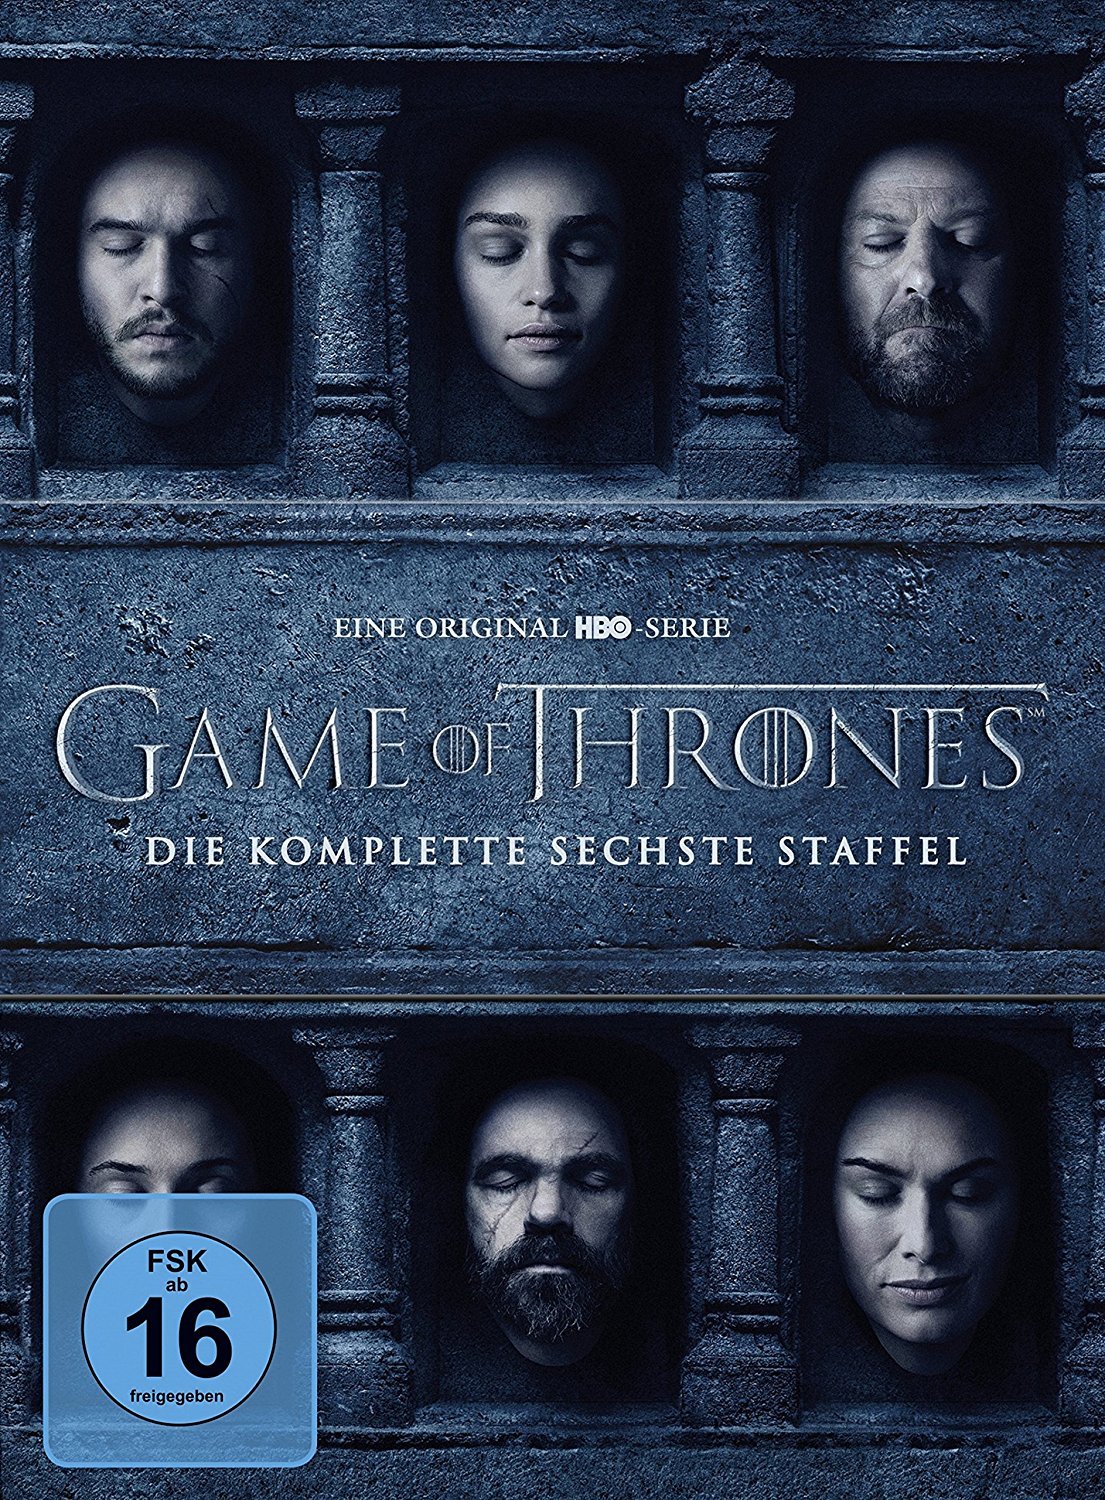 dvd 11 16 game of thrones 6